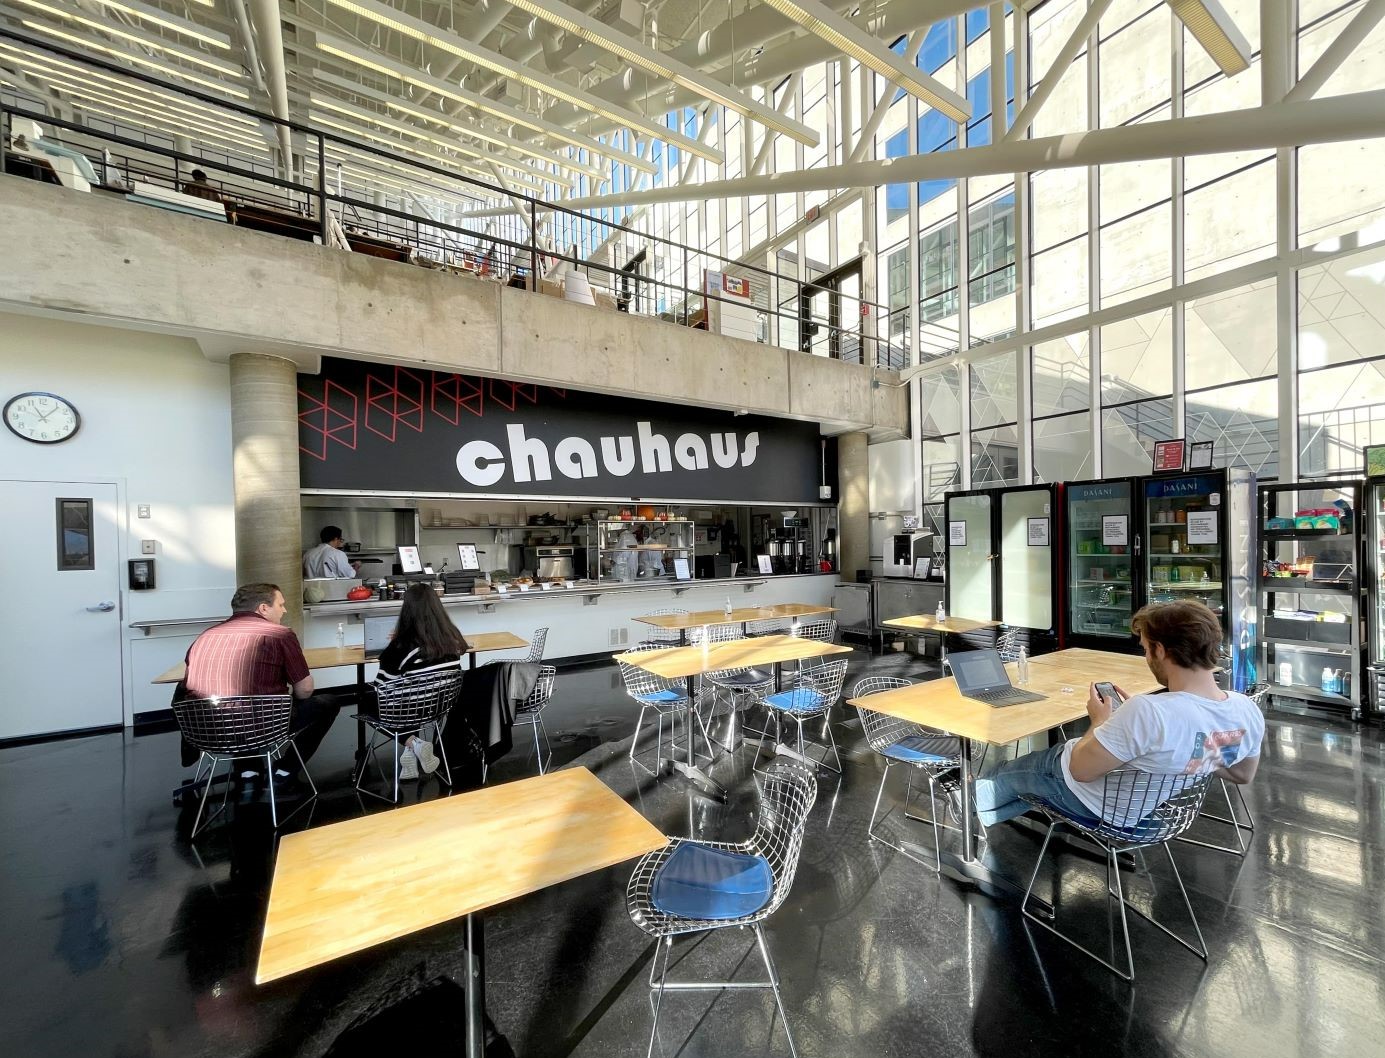 Students sitting and working in the ChauHaus cafe.